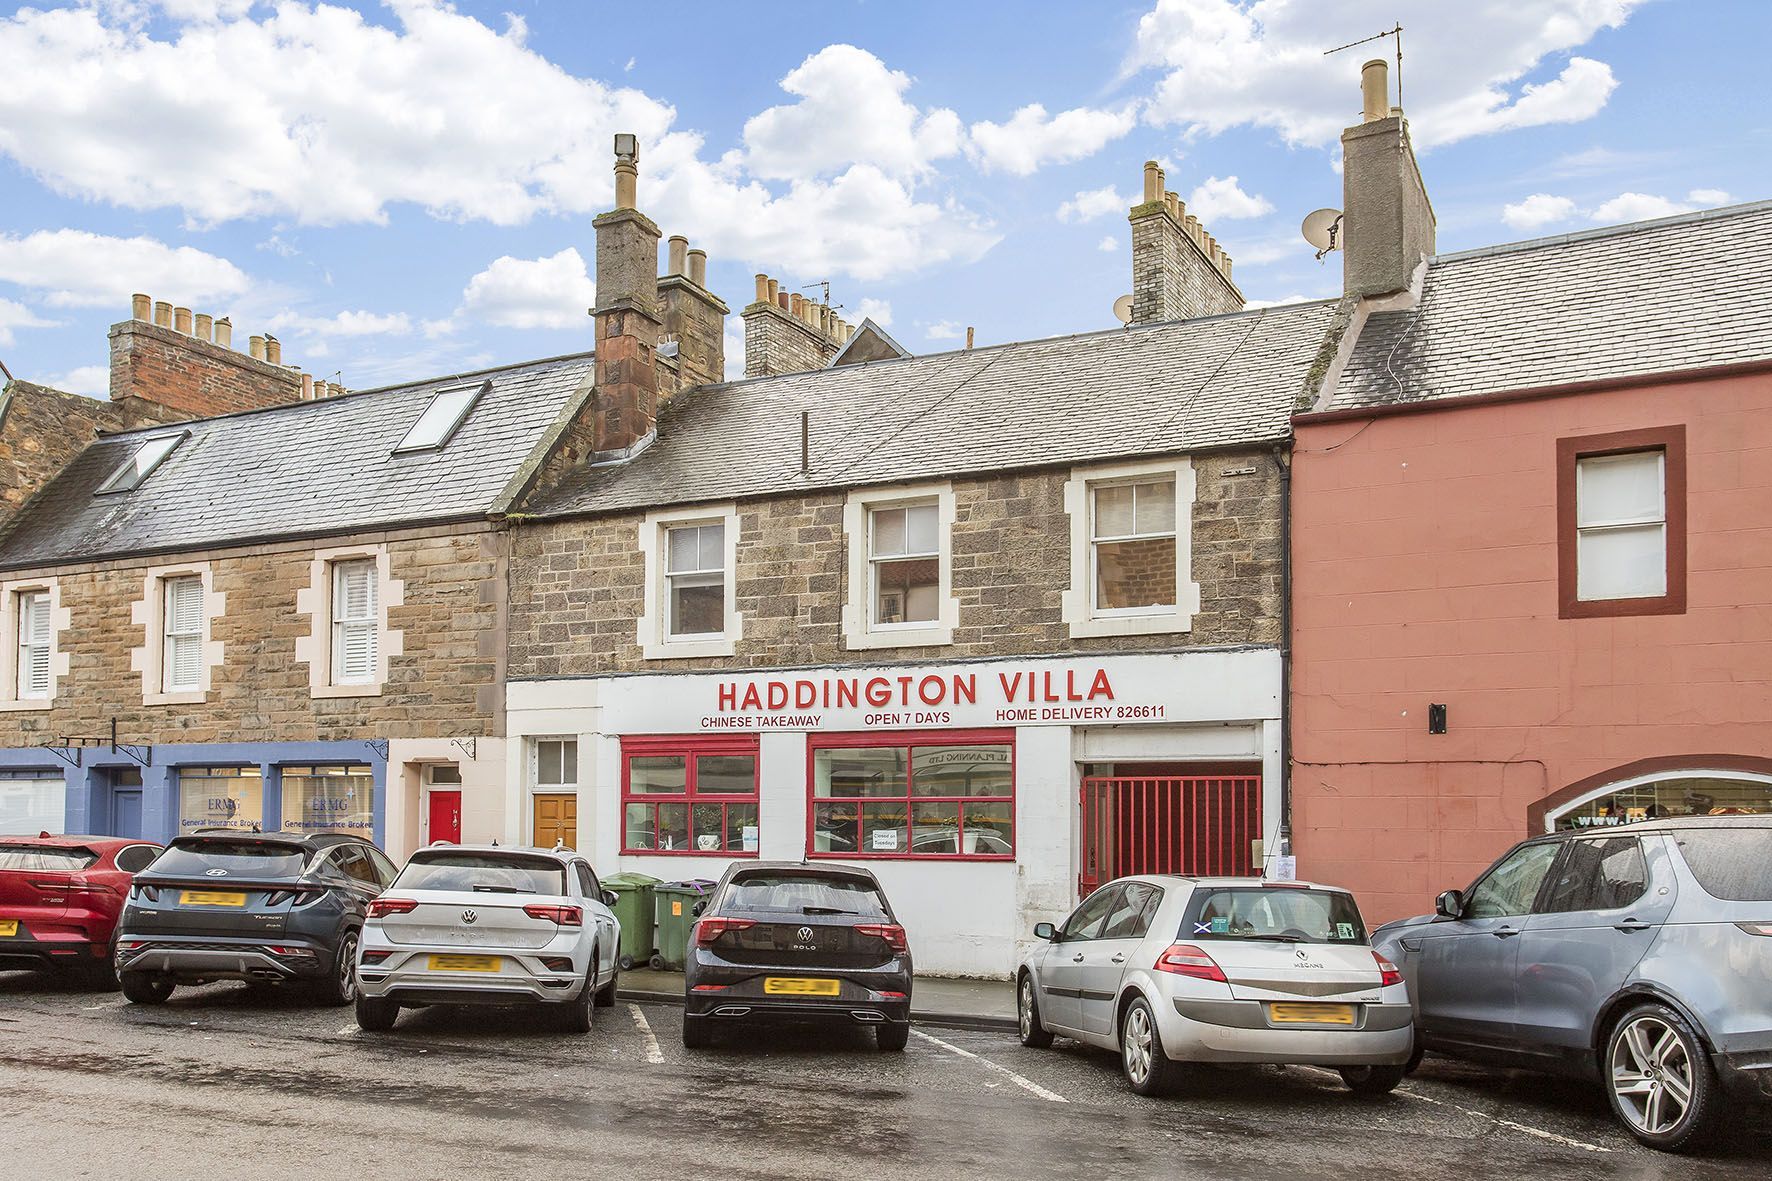 edinburgh for sale: the top 10 most viewed properties in january on the espc website